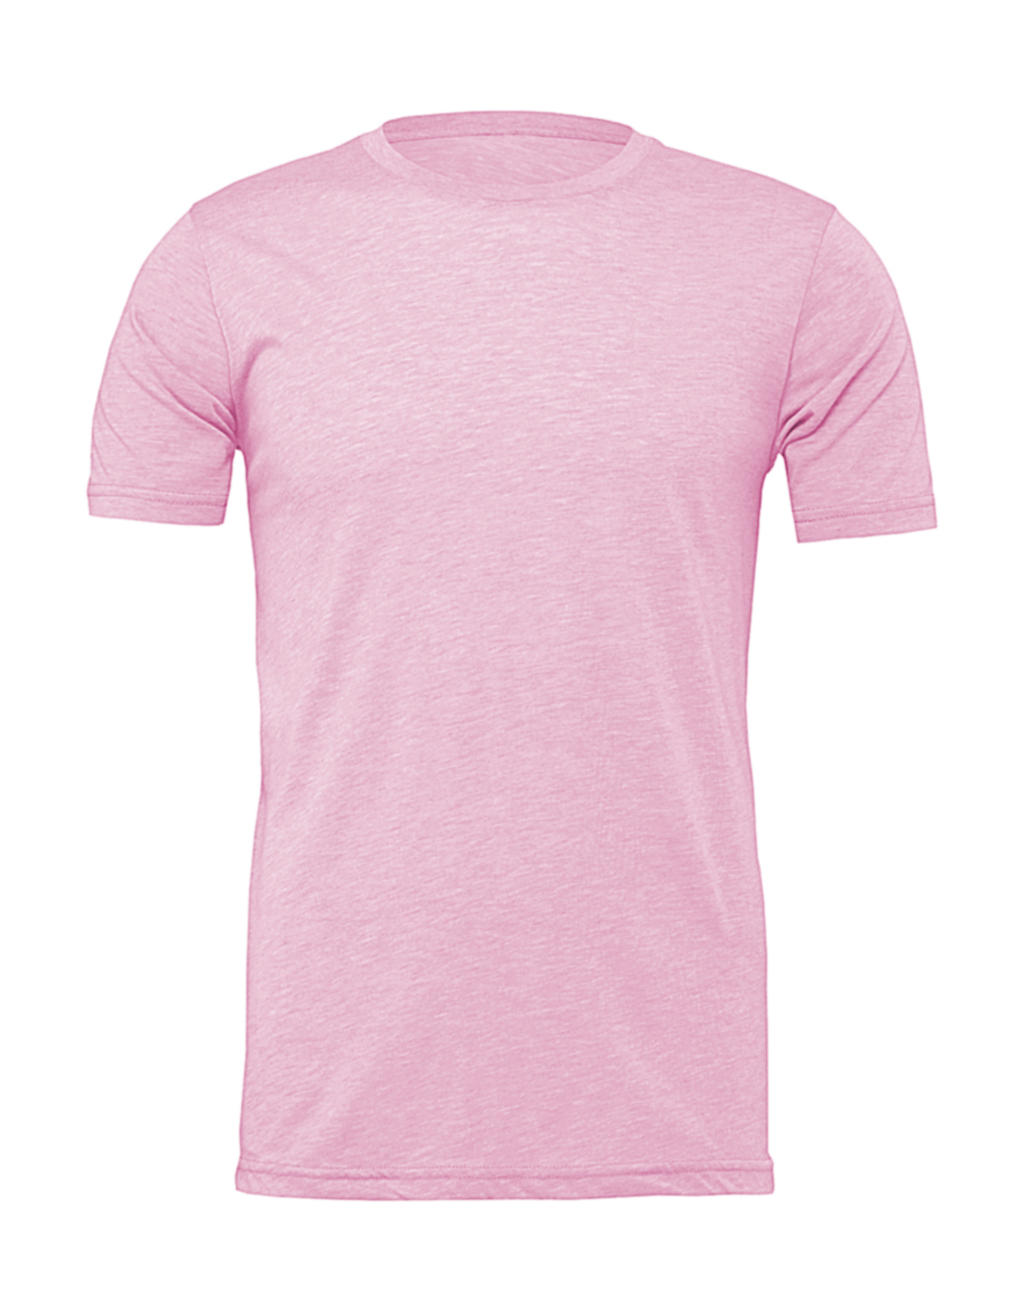  Unisex Heather CVC Short Sleeve Tee in Farbe Heather Prism Lilac